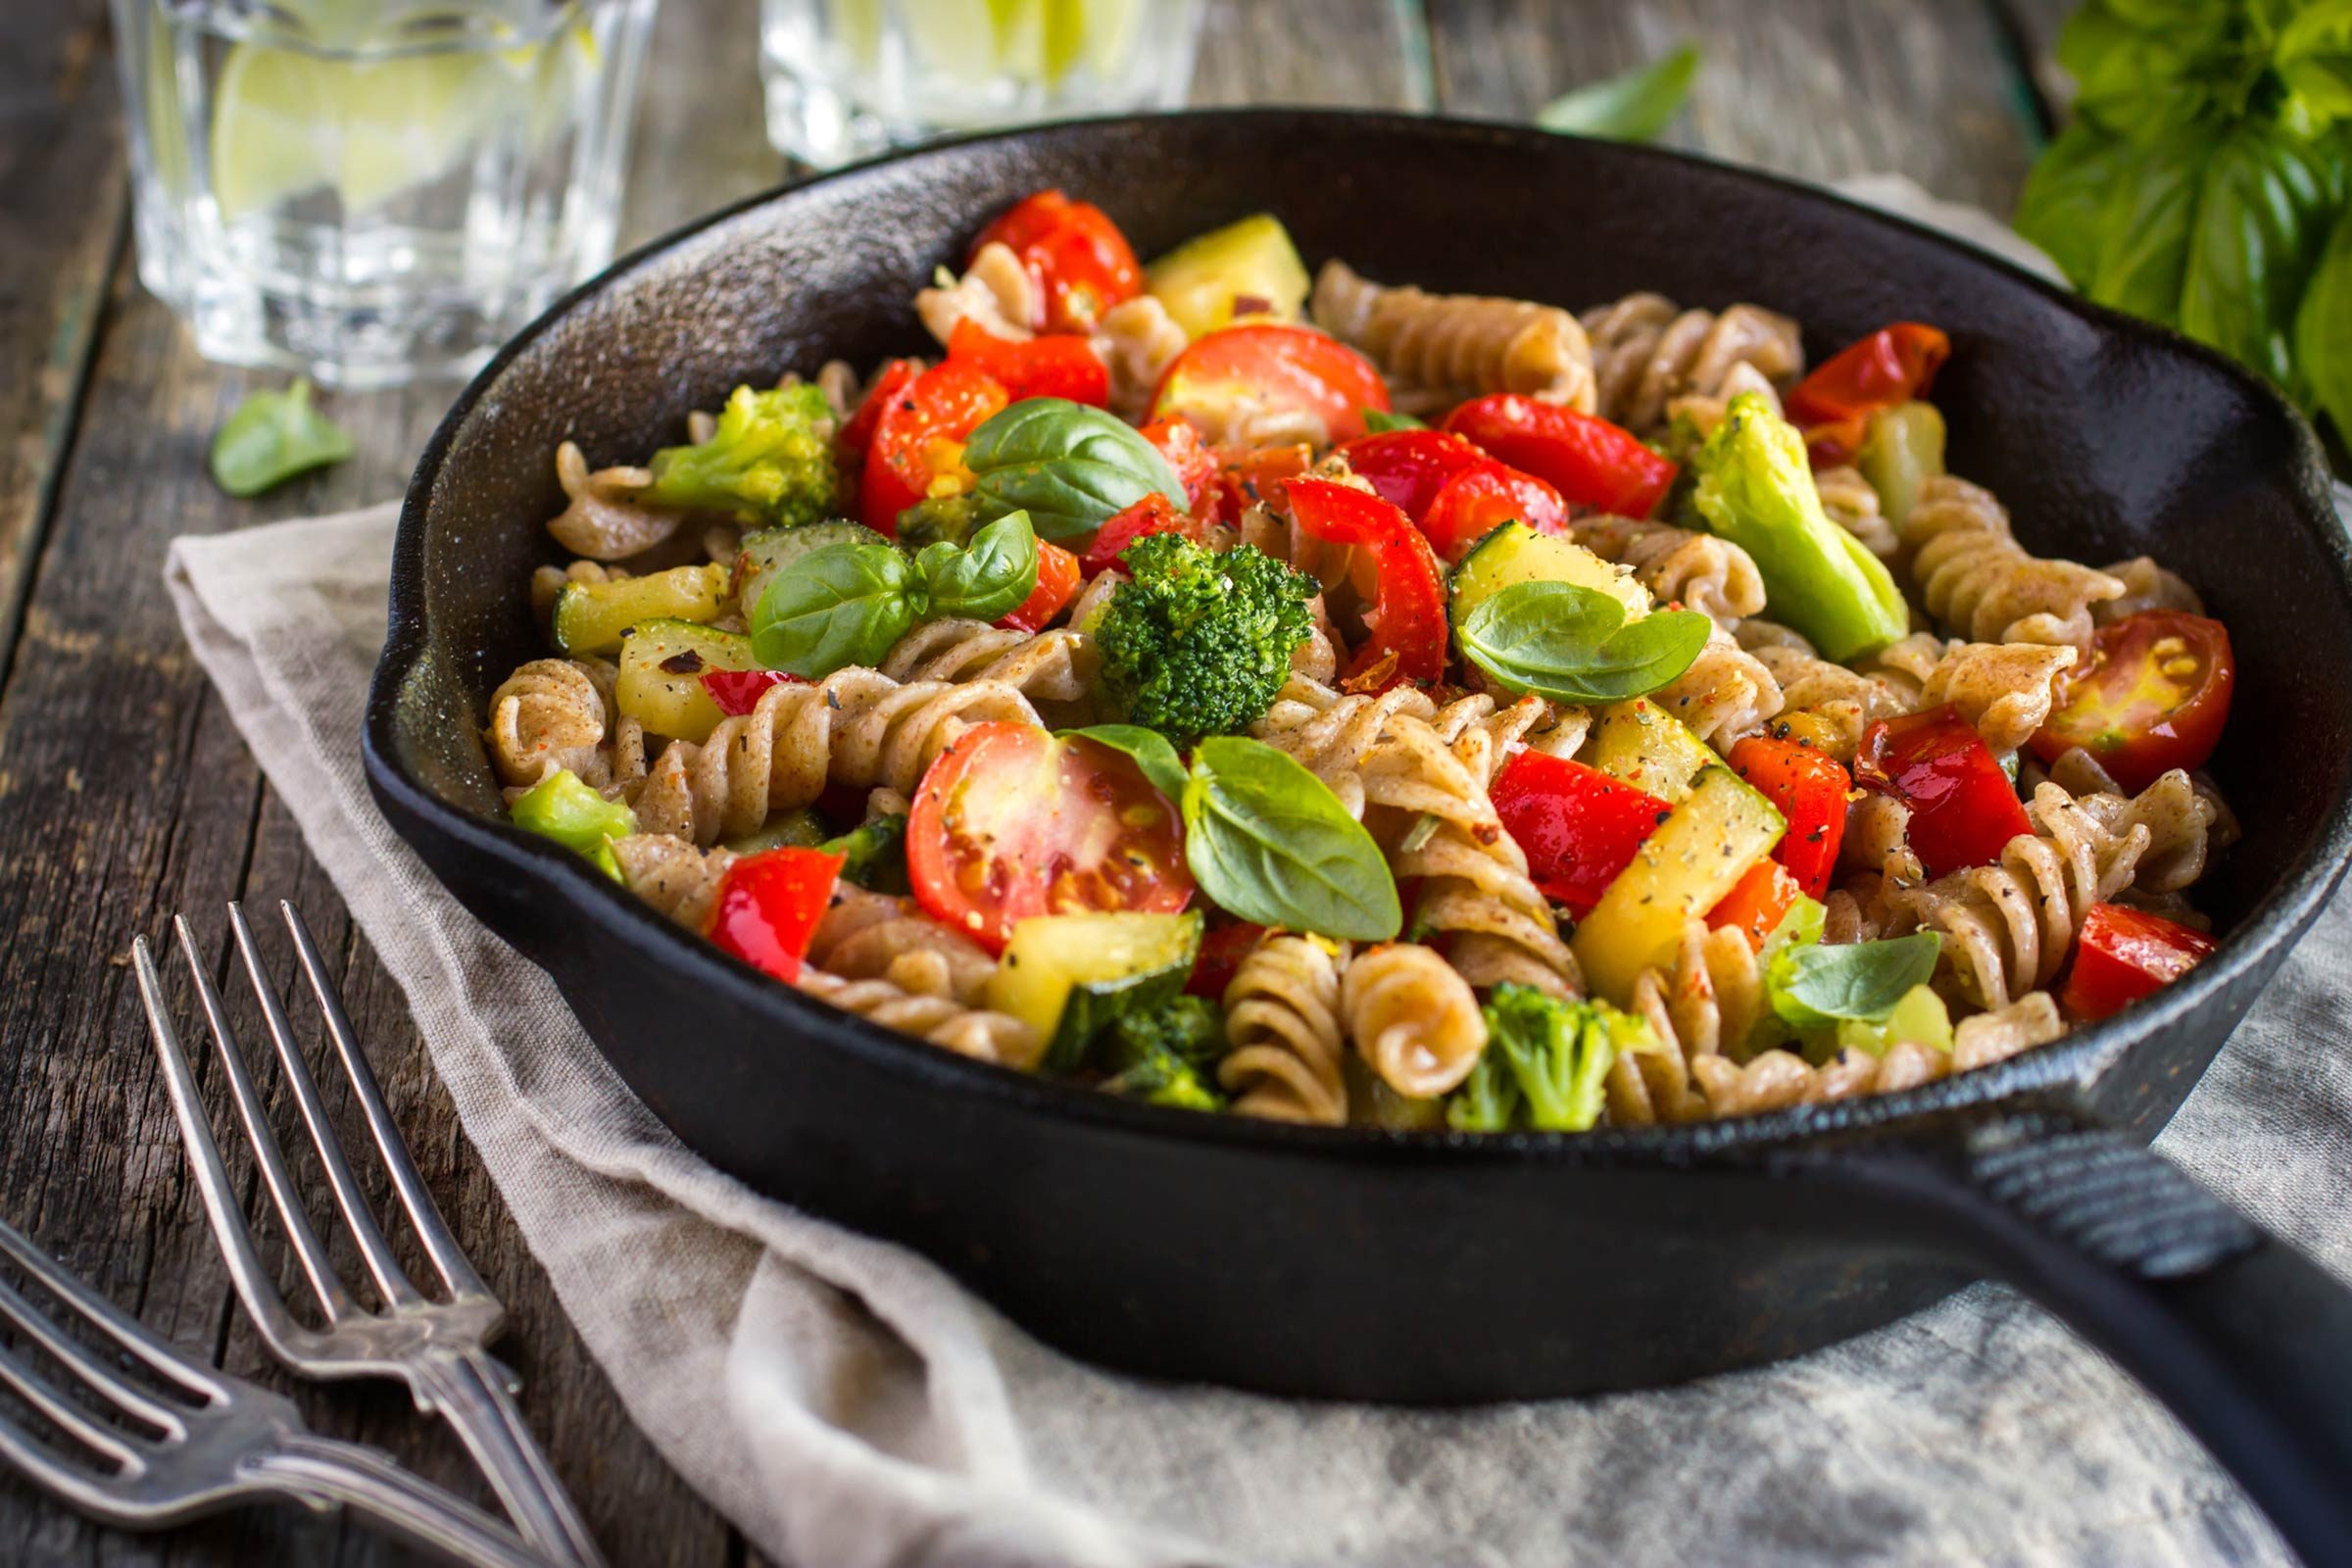 cast iron skillet of pasta and vegetables